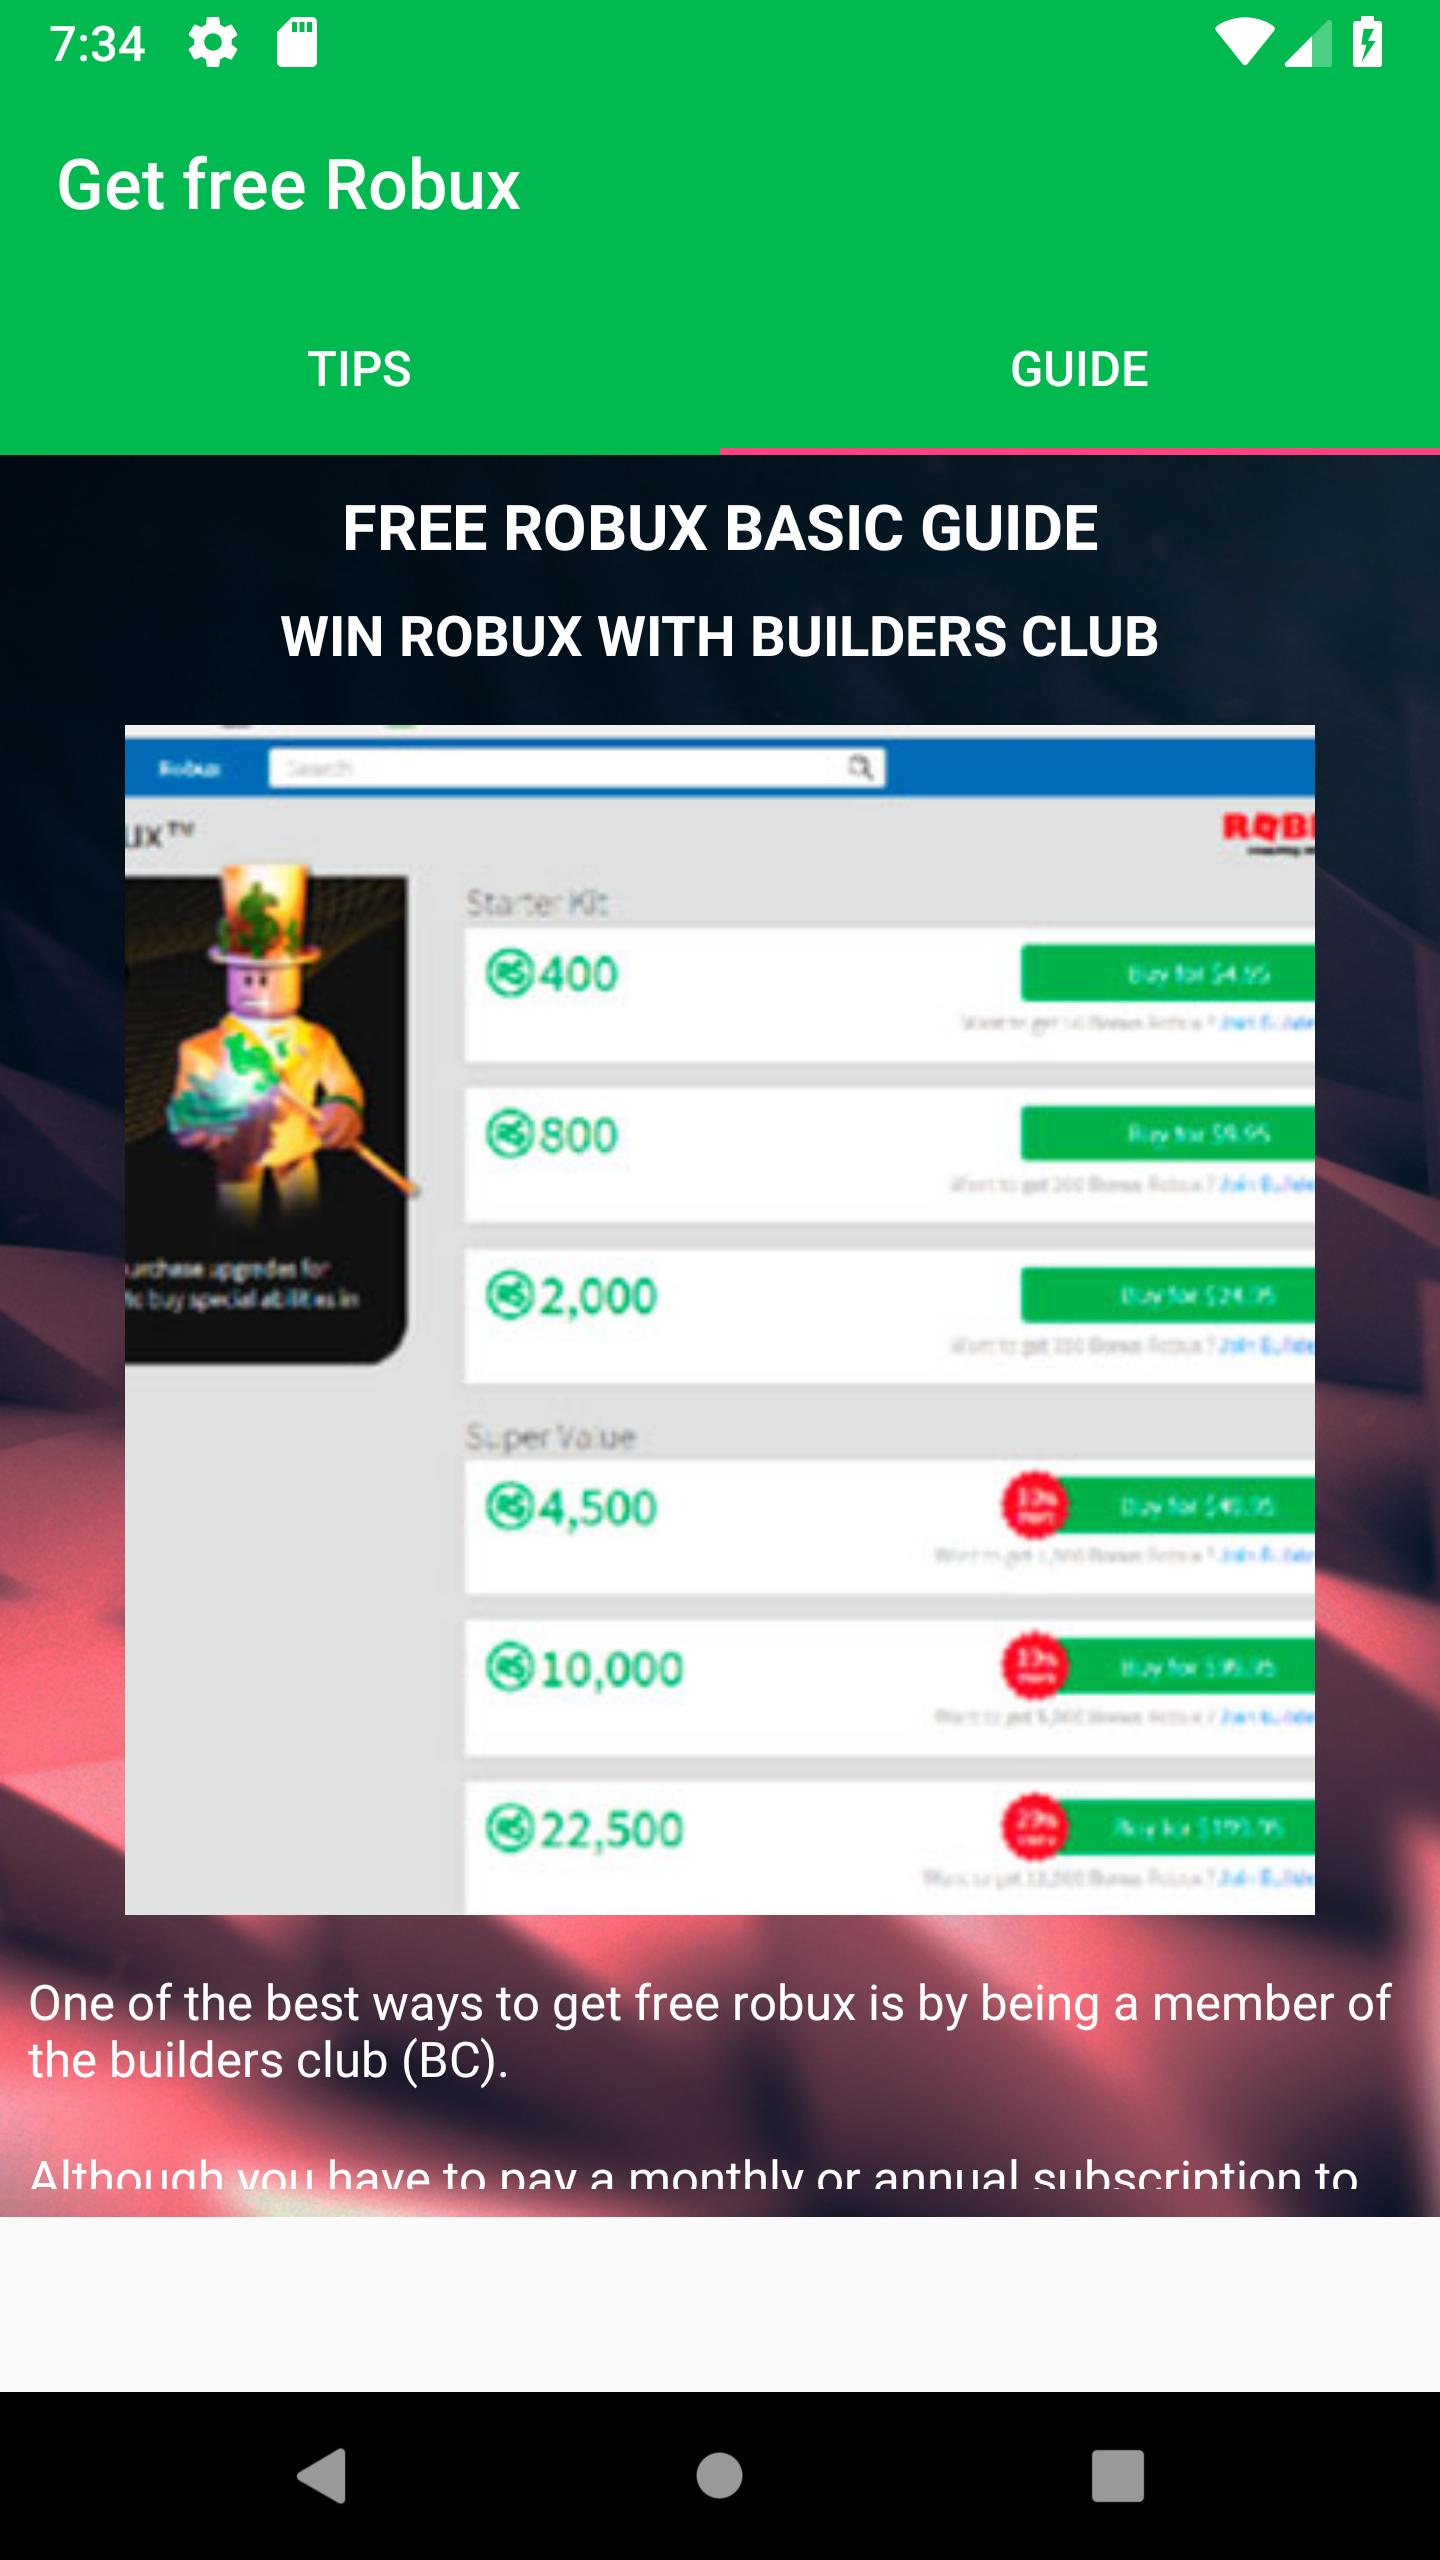 Free Robux Now Earn Robux Free Today Tips 2018 For Android - winrobux instagram posts gramho com